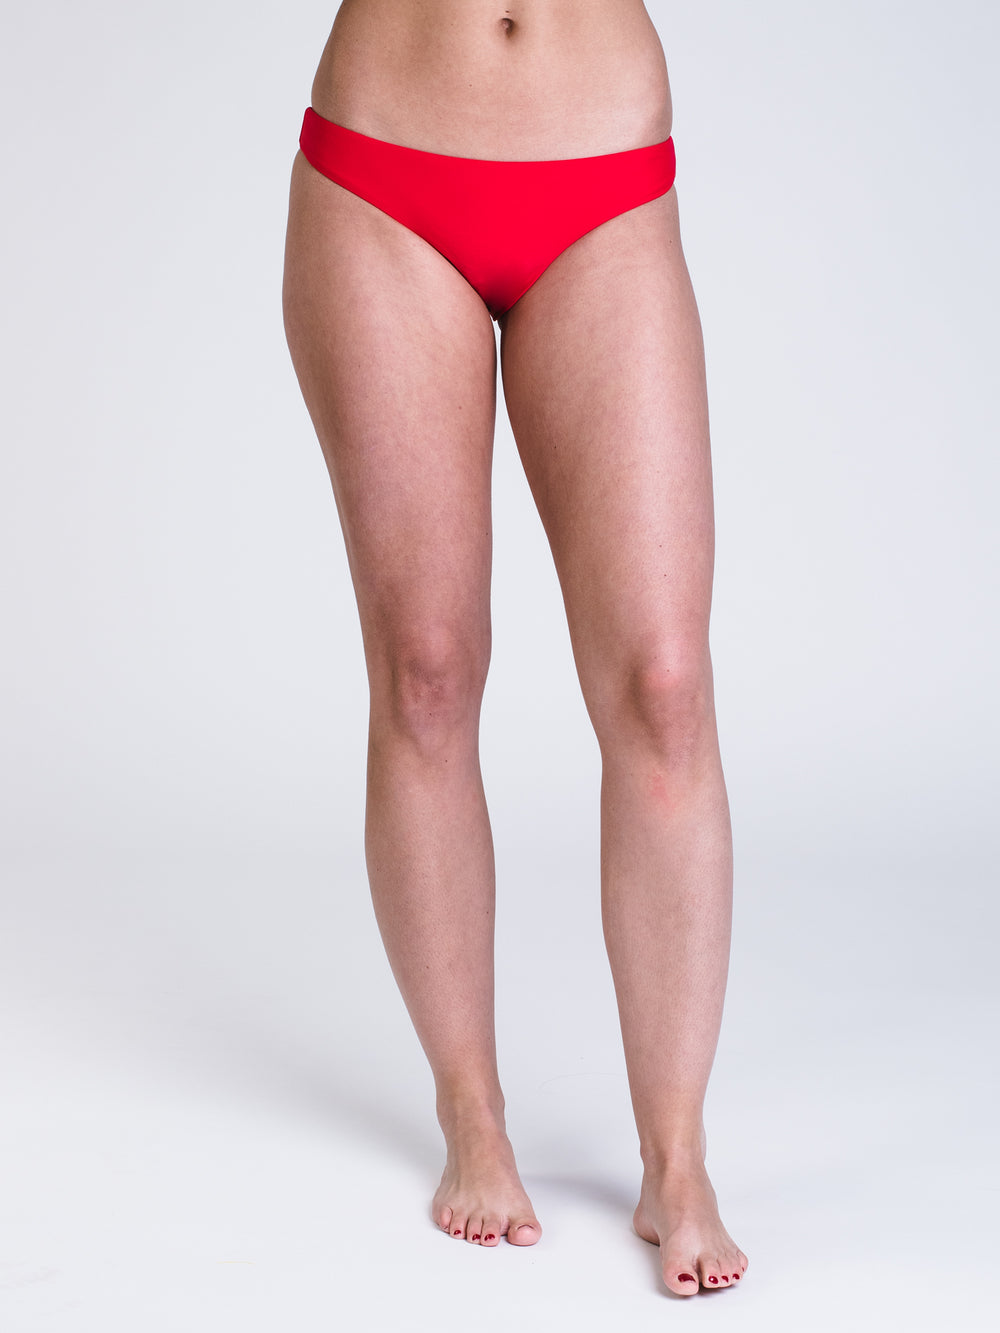 BAE-SIK EXTRA CHEEKY SWIM BOTTOMS - CLEARANCE